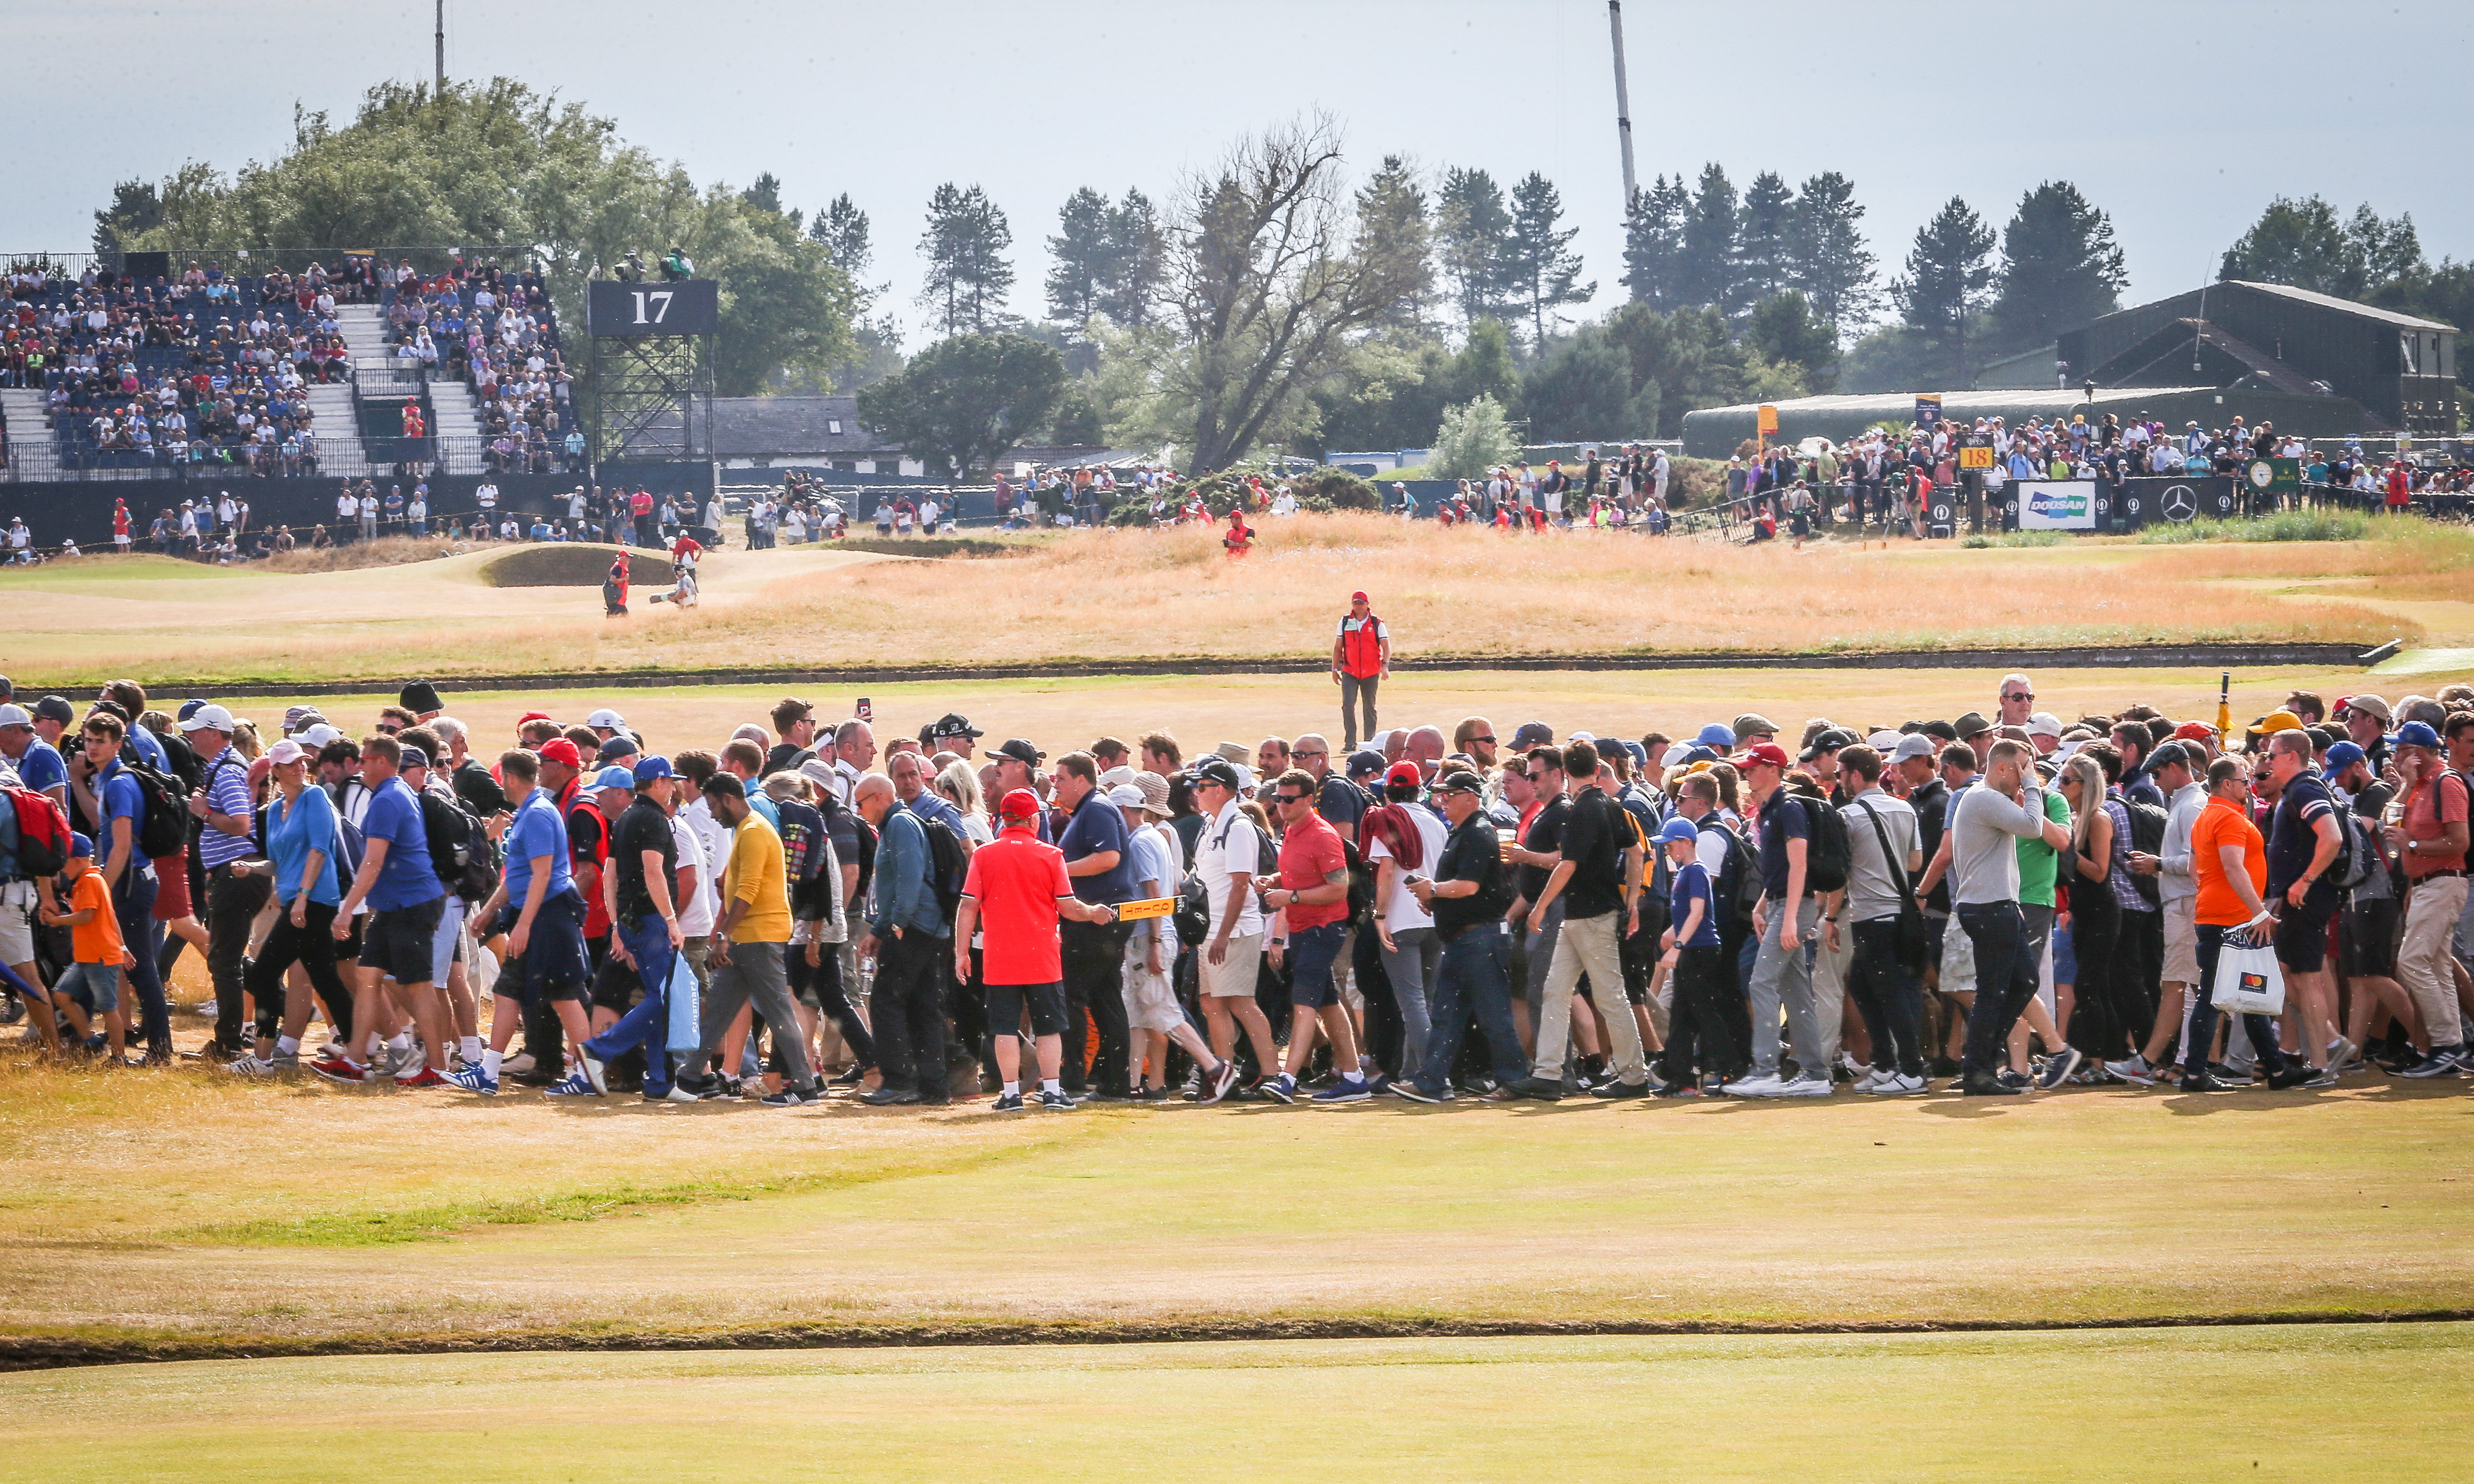 Large crowds lining the fairways to watch players including Tiger Woods. Pic shows large crowds following the big names round Carnoustie Golf Links and watching on the big screen. Saturday, 21st July, 2018.